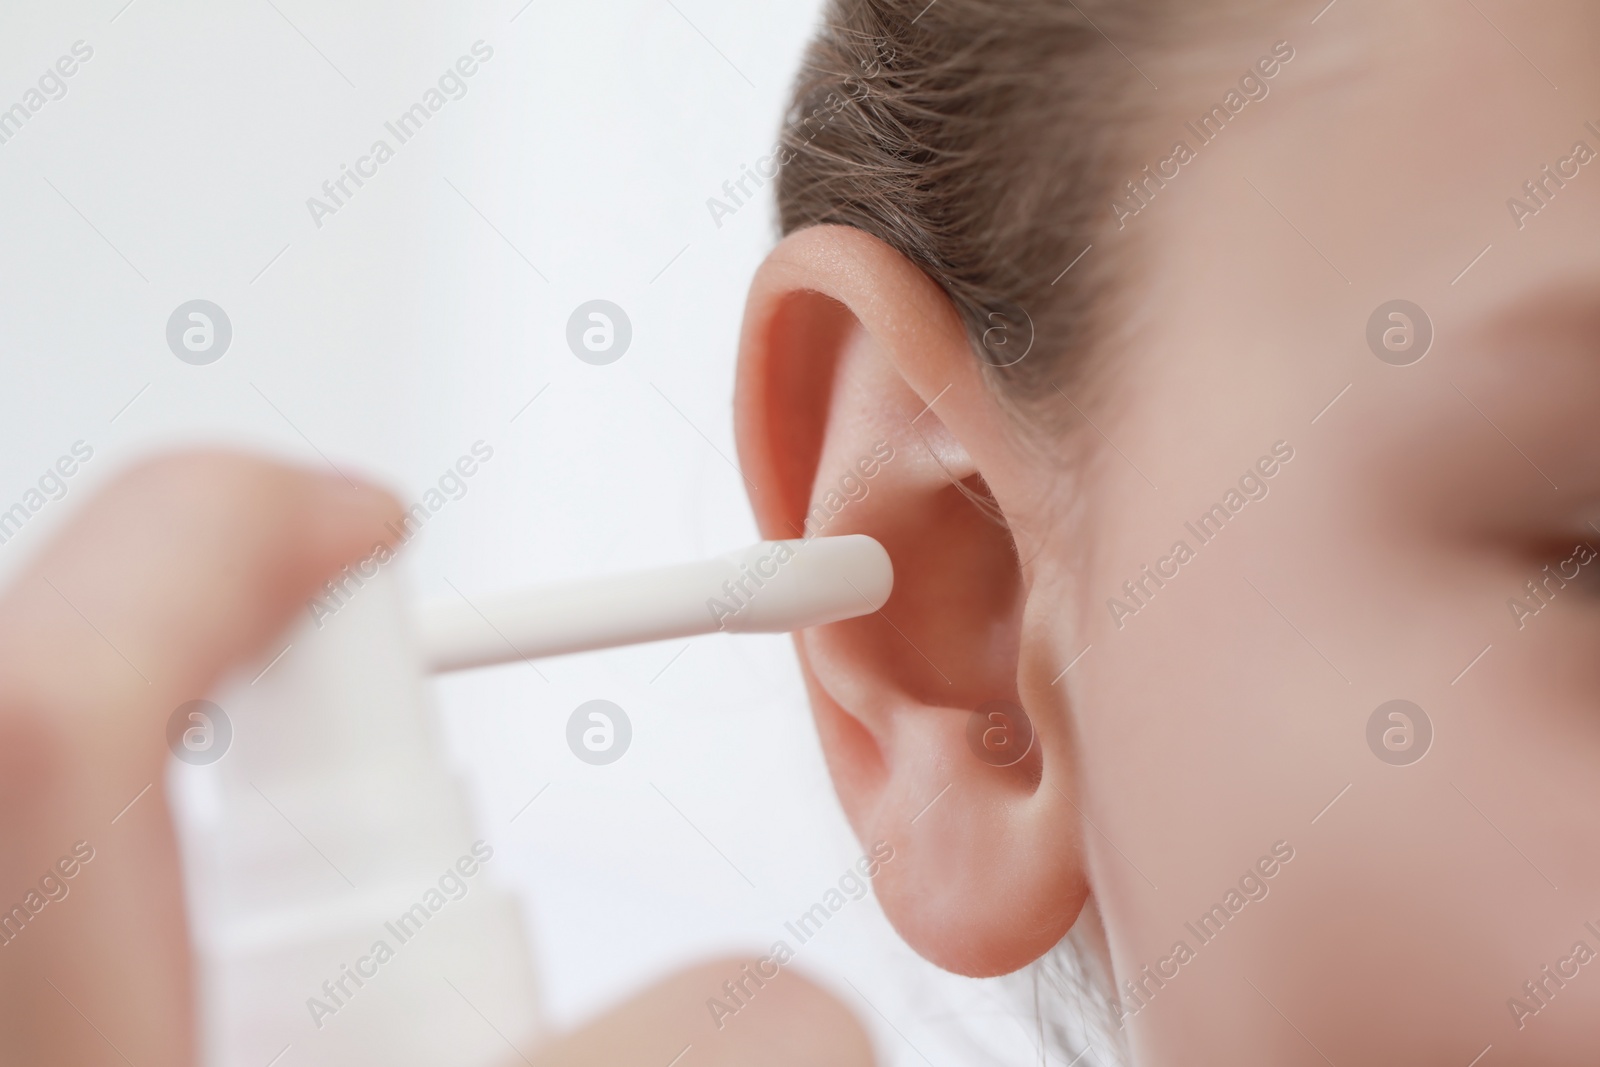 Photo of Mother spraying medication into daughter's ear on light background, closeup